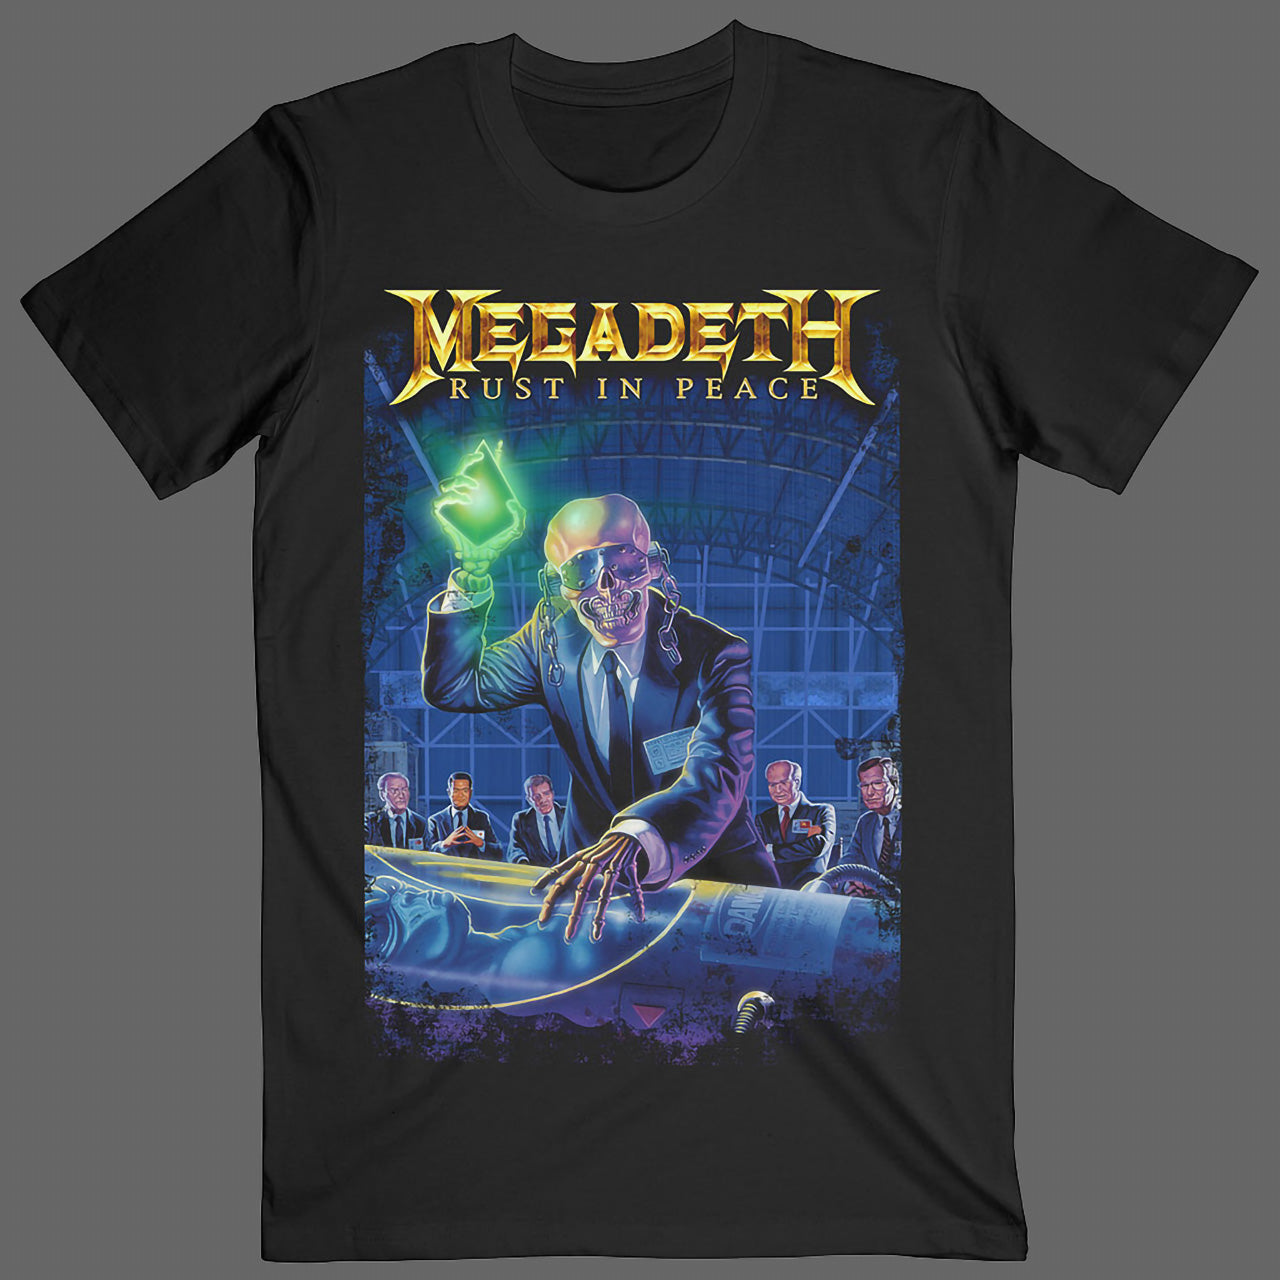 Megadeth - Rust in Peace (30th Anniversary) (T-Shirt)